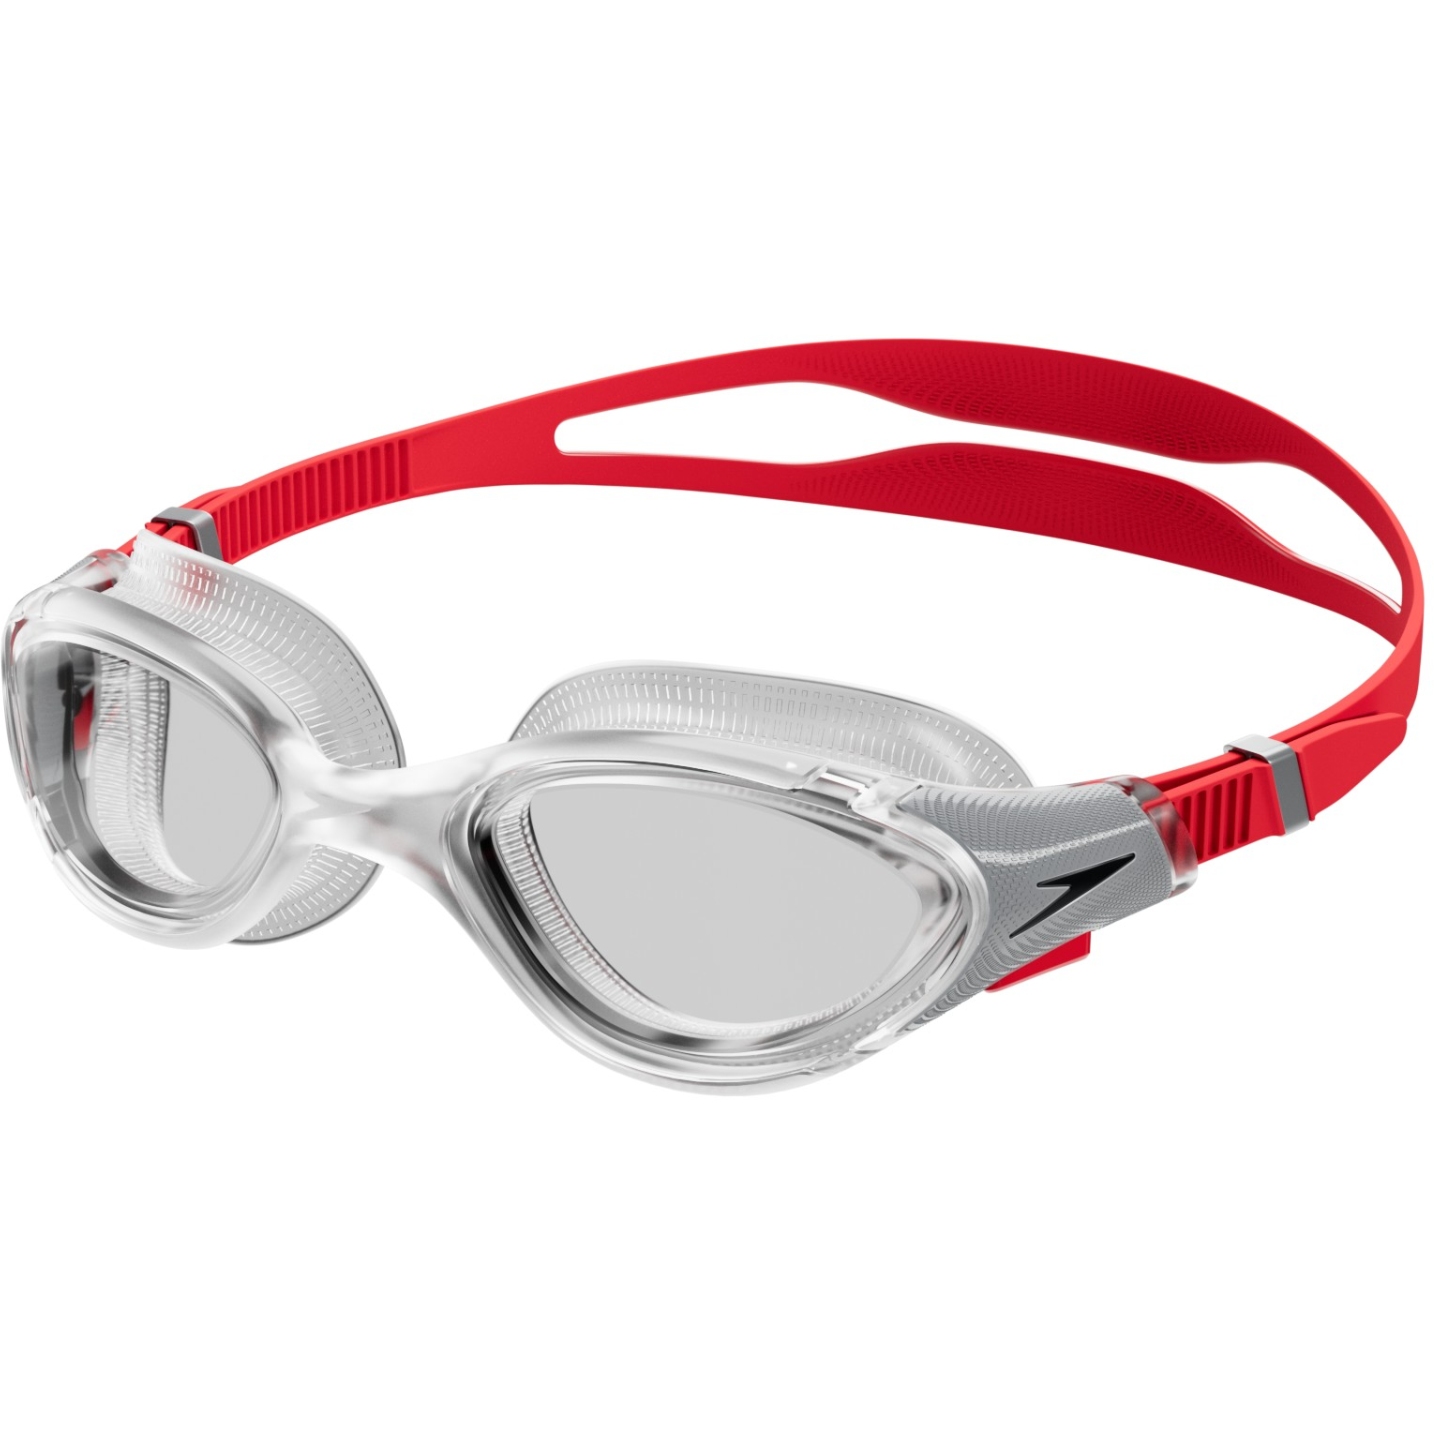 Productfoto van Speedo Futura Biofuse Flexiseal Zwembril - fed red/silver/clear